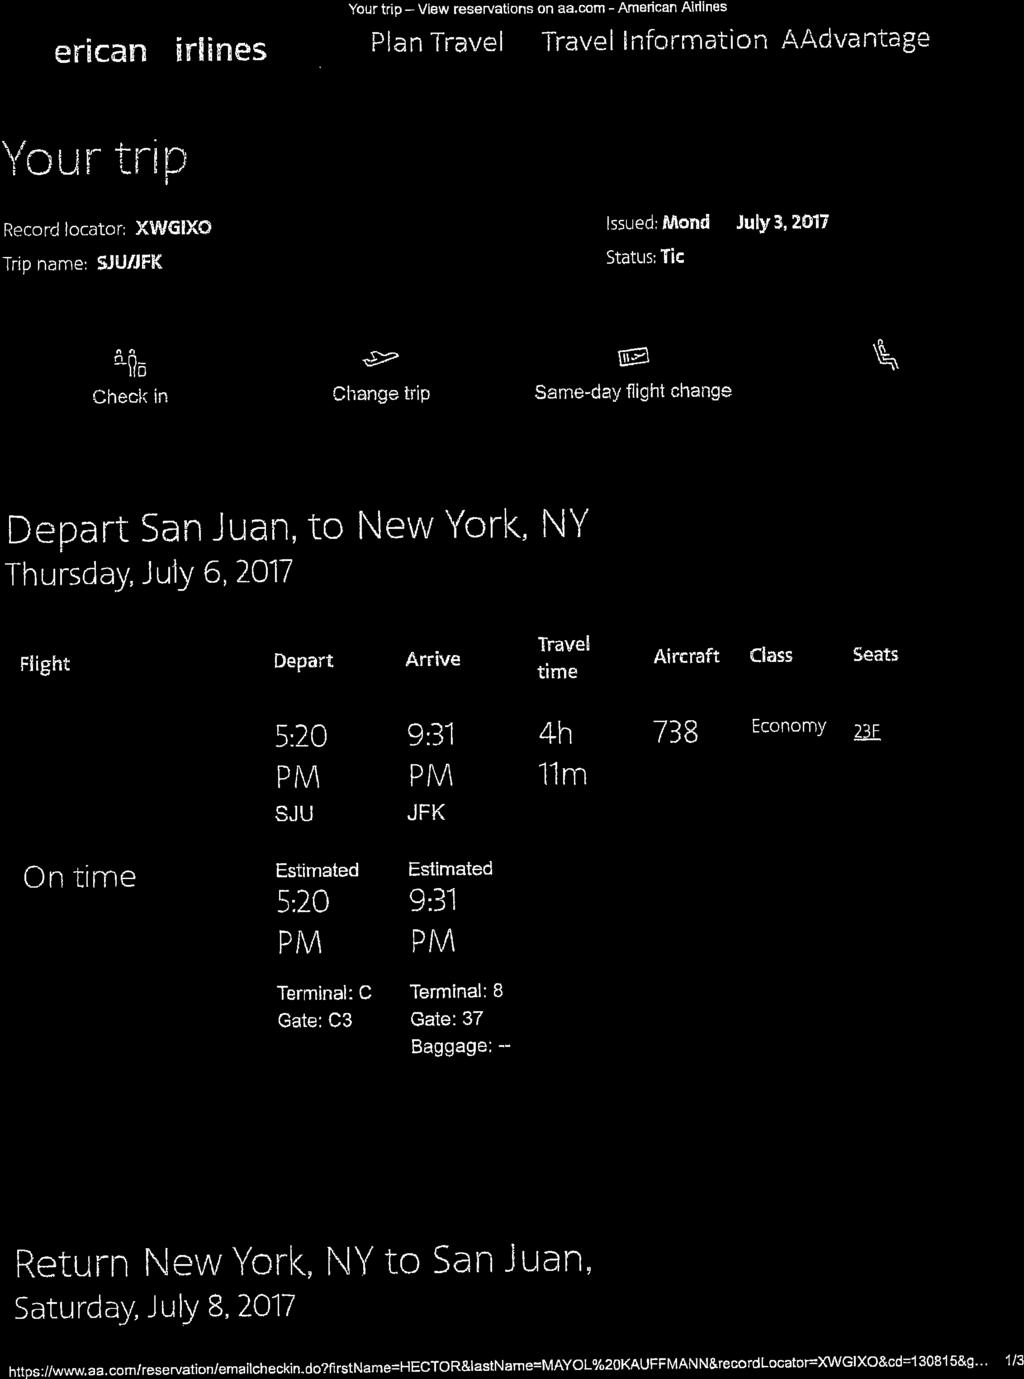 Case:17-03283-LTS Doc#:1806-5 Filed:11/15/17 Entered:11/15/17 21:06:01 Exhibit E - Detailed Expenses Page 4 of 34 7/5/2017 Your trip - View reservations on aa.com - American Airlines!